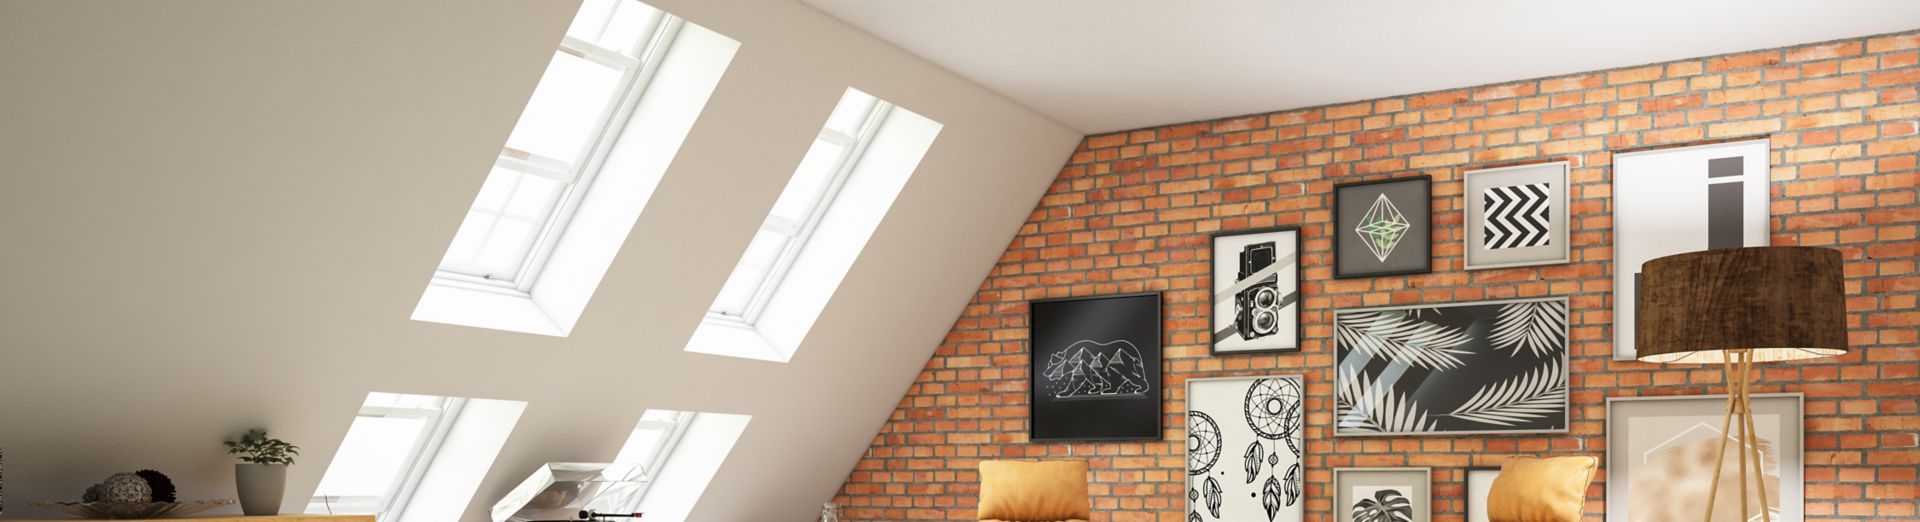 Loft apartment with framed photographs and artwork on the walls